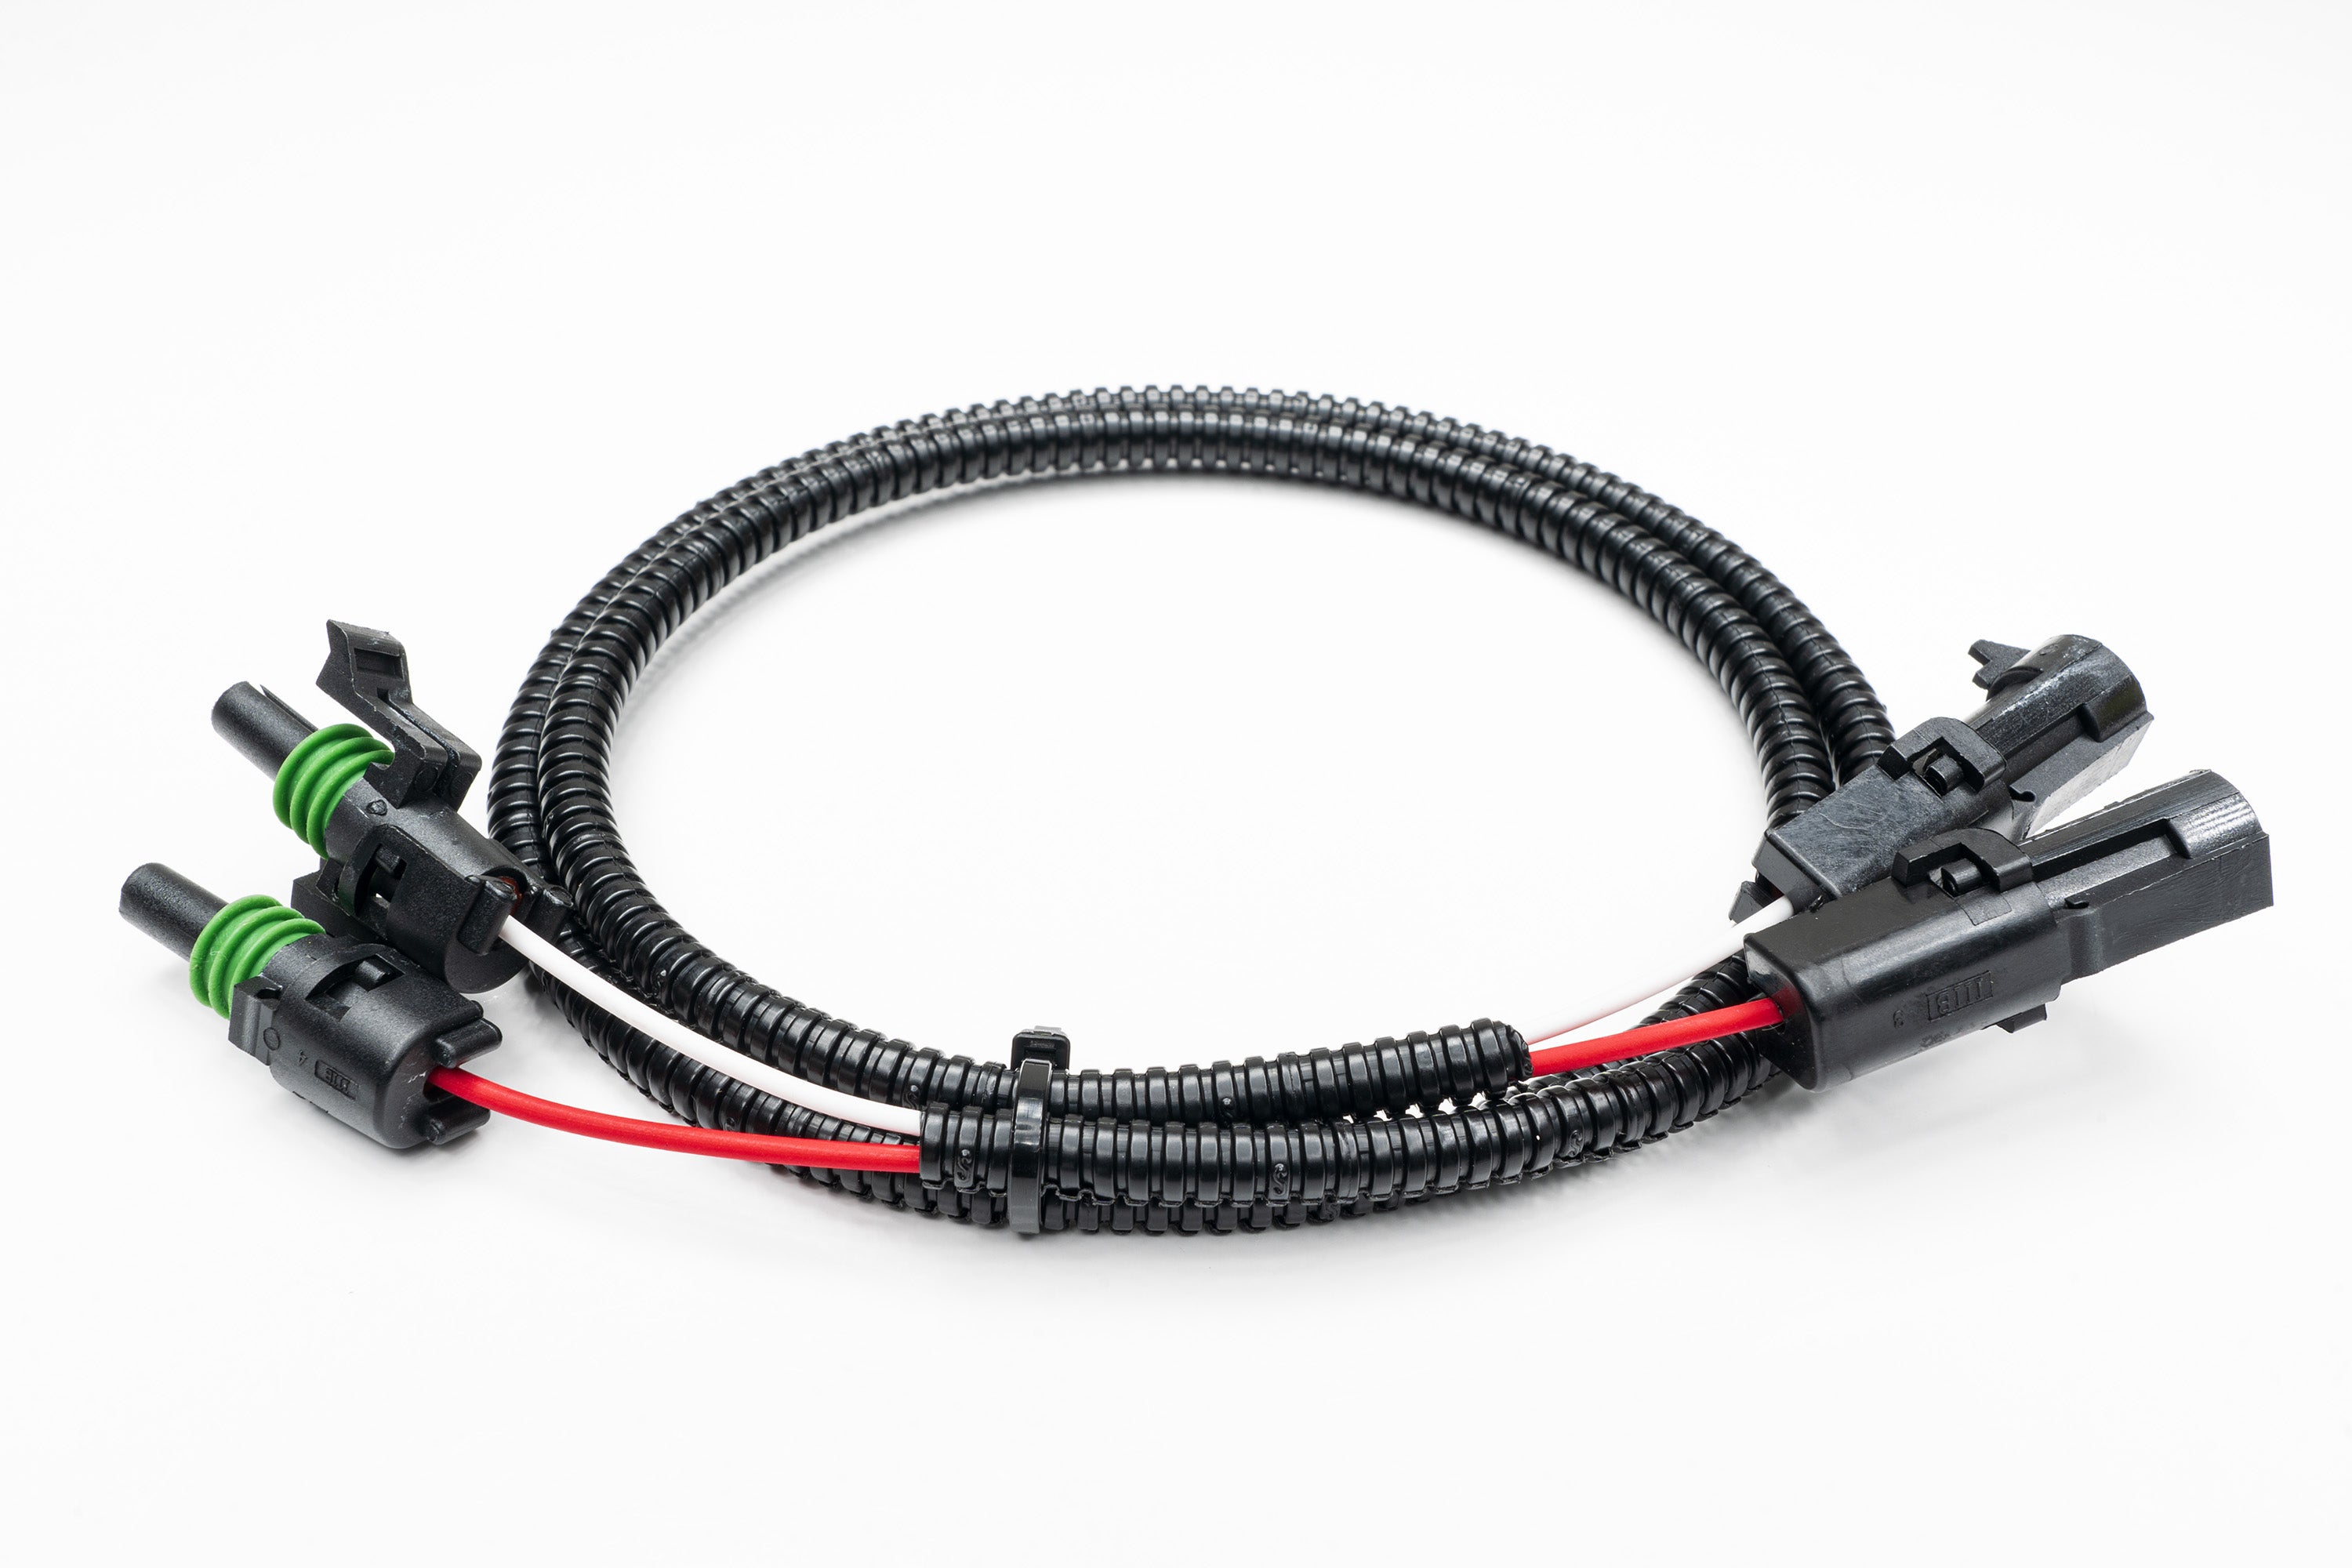 SPV Parts Harness 3 Foot Extension with Single Pin Connectors (To Switches) - SPV Harness System